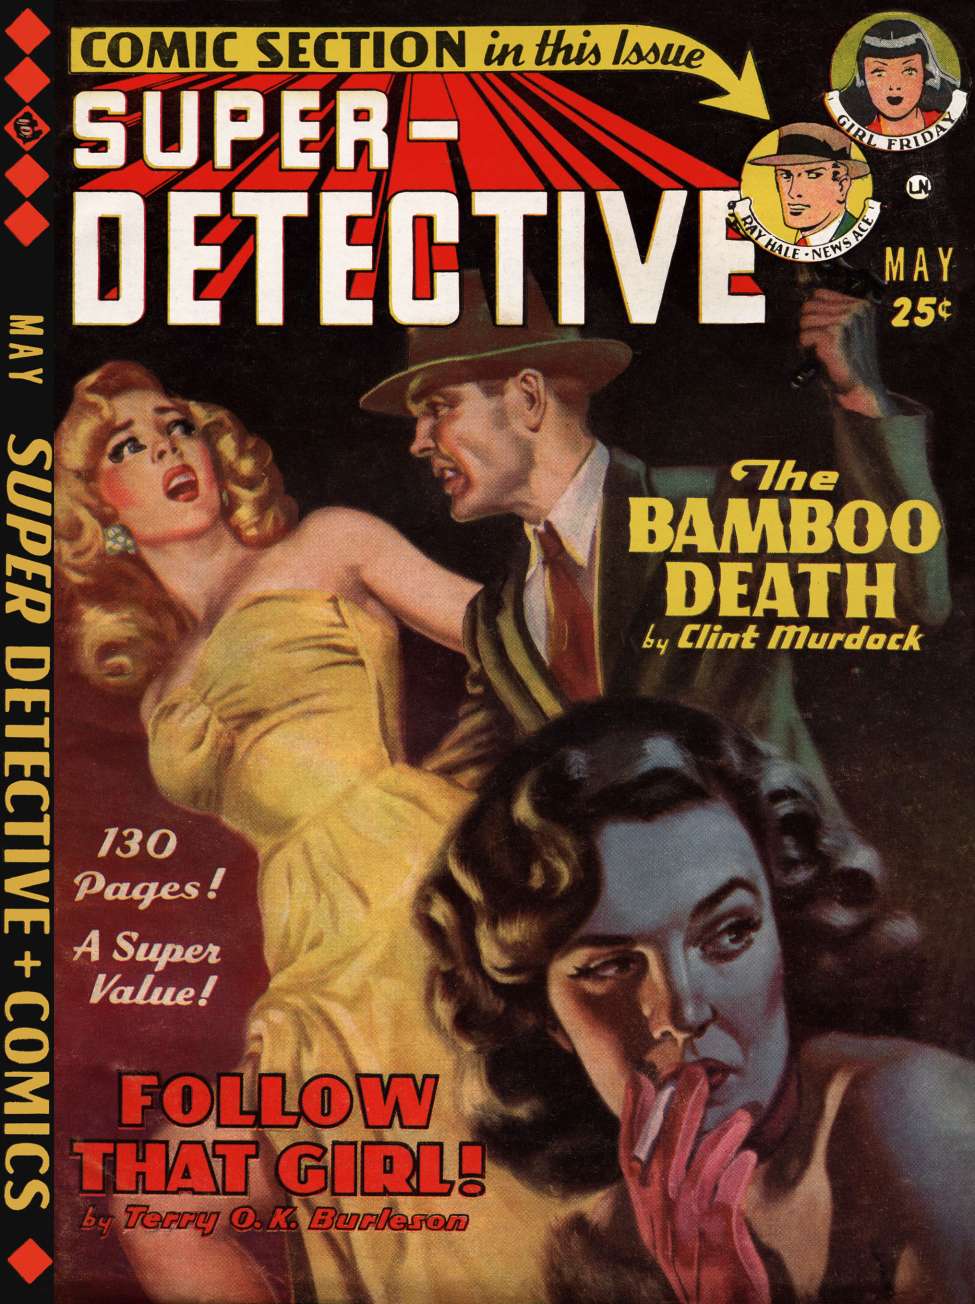 Book Cover For Super-Detective V11 n02 May 1950